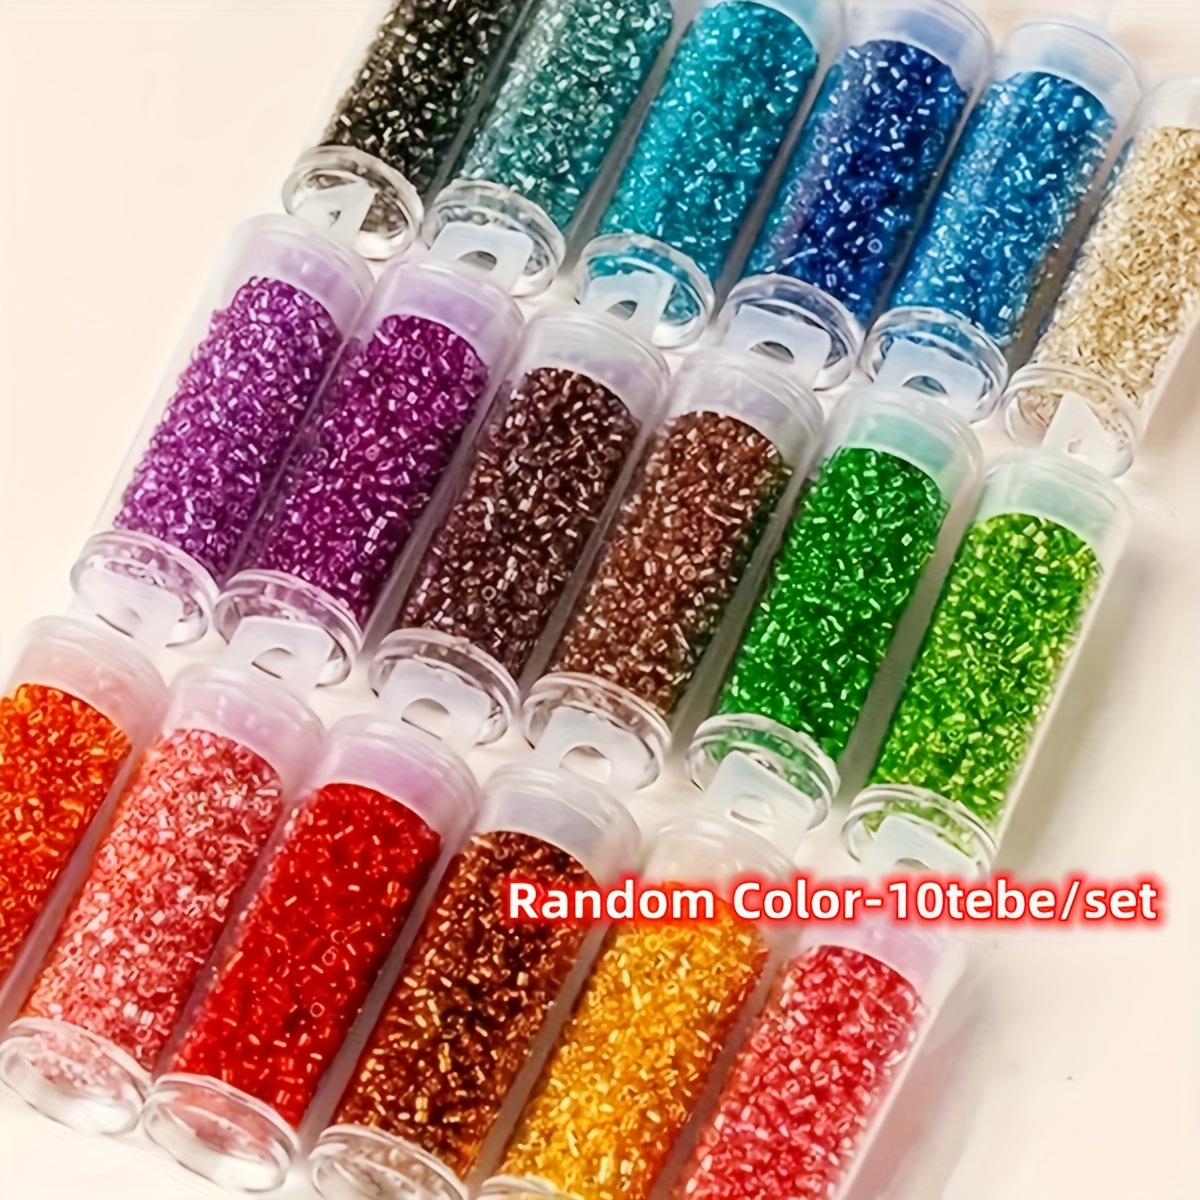 

Bohemian Style Glass Beads For Jewelry Crafting - 10 Tubes, 2mm With Metallic Lining, Ideal For Embroidery & Handmade Accessories, Mixed Colors